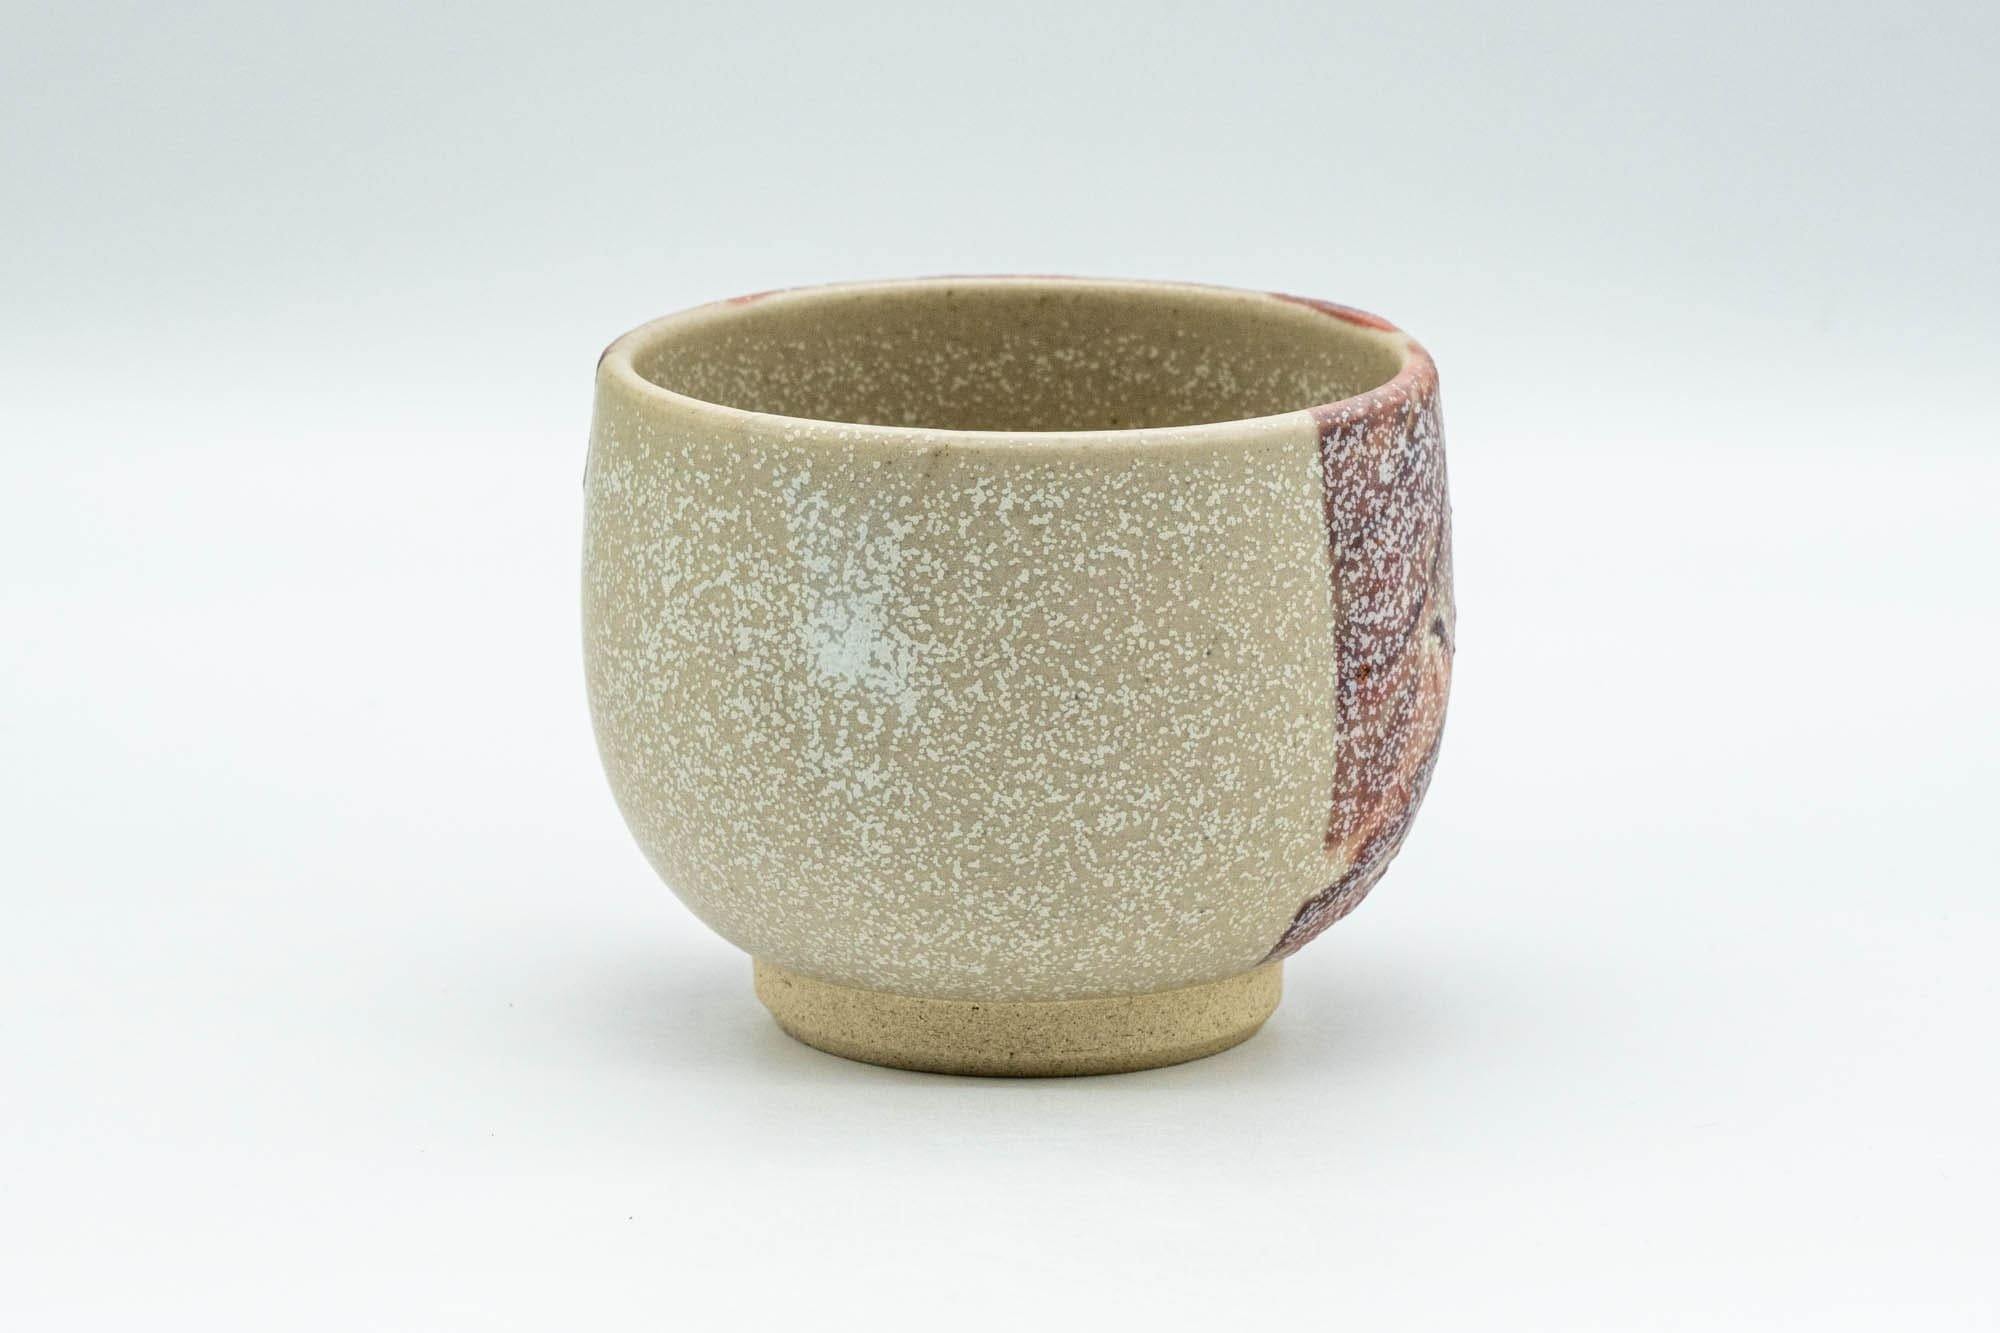 Japanese Teacup - Beige and Magenta Speckled Yunomi - 150ml - Tezumi